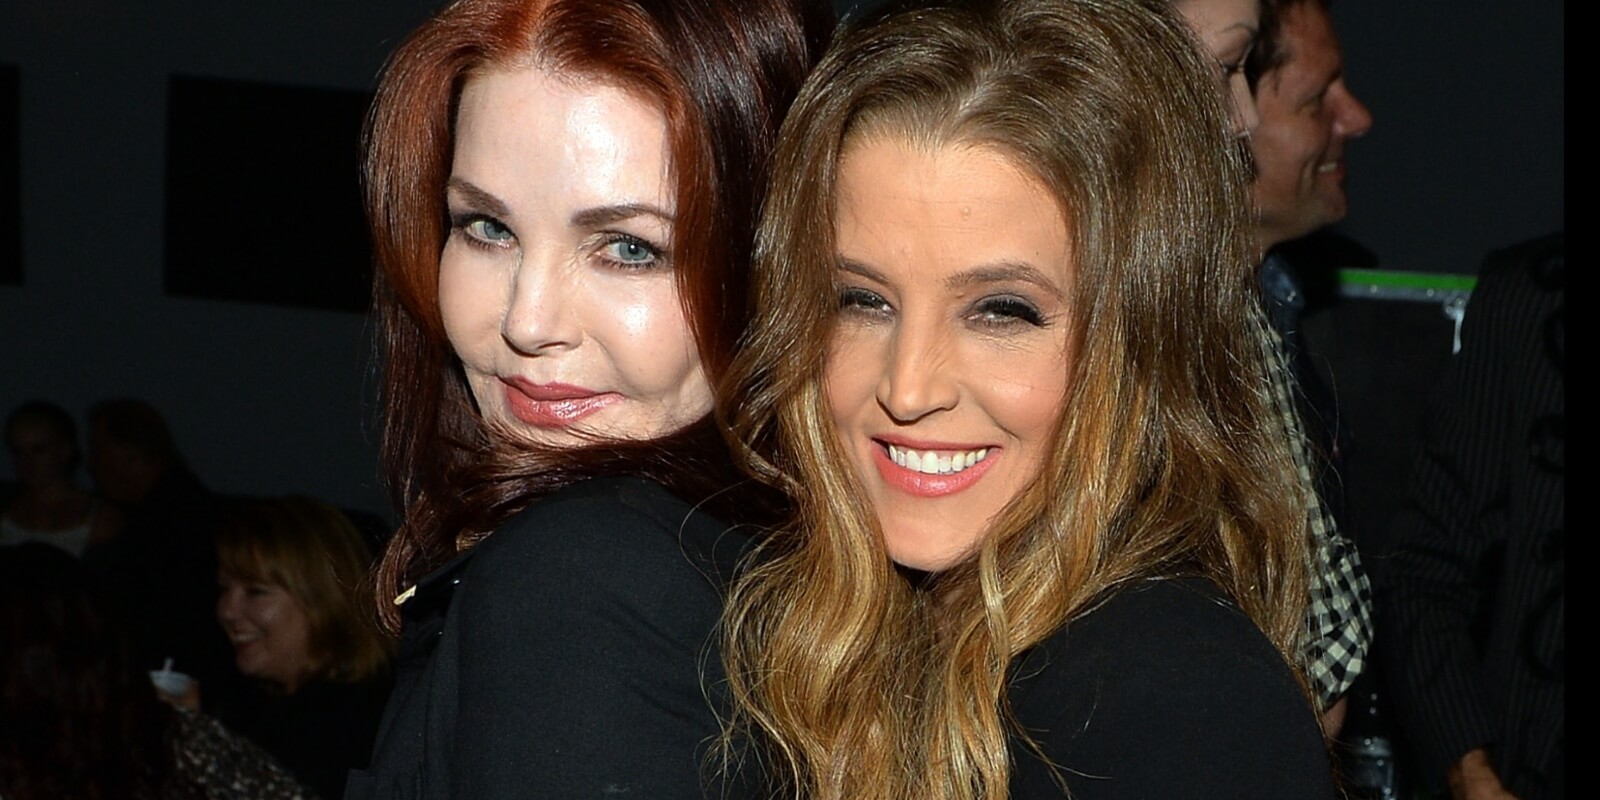 Priscilla Presley and Lisa Marie Presley photographed in 2013.